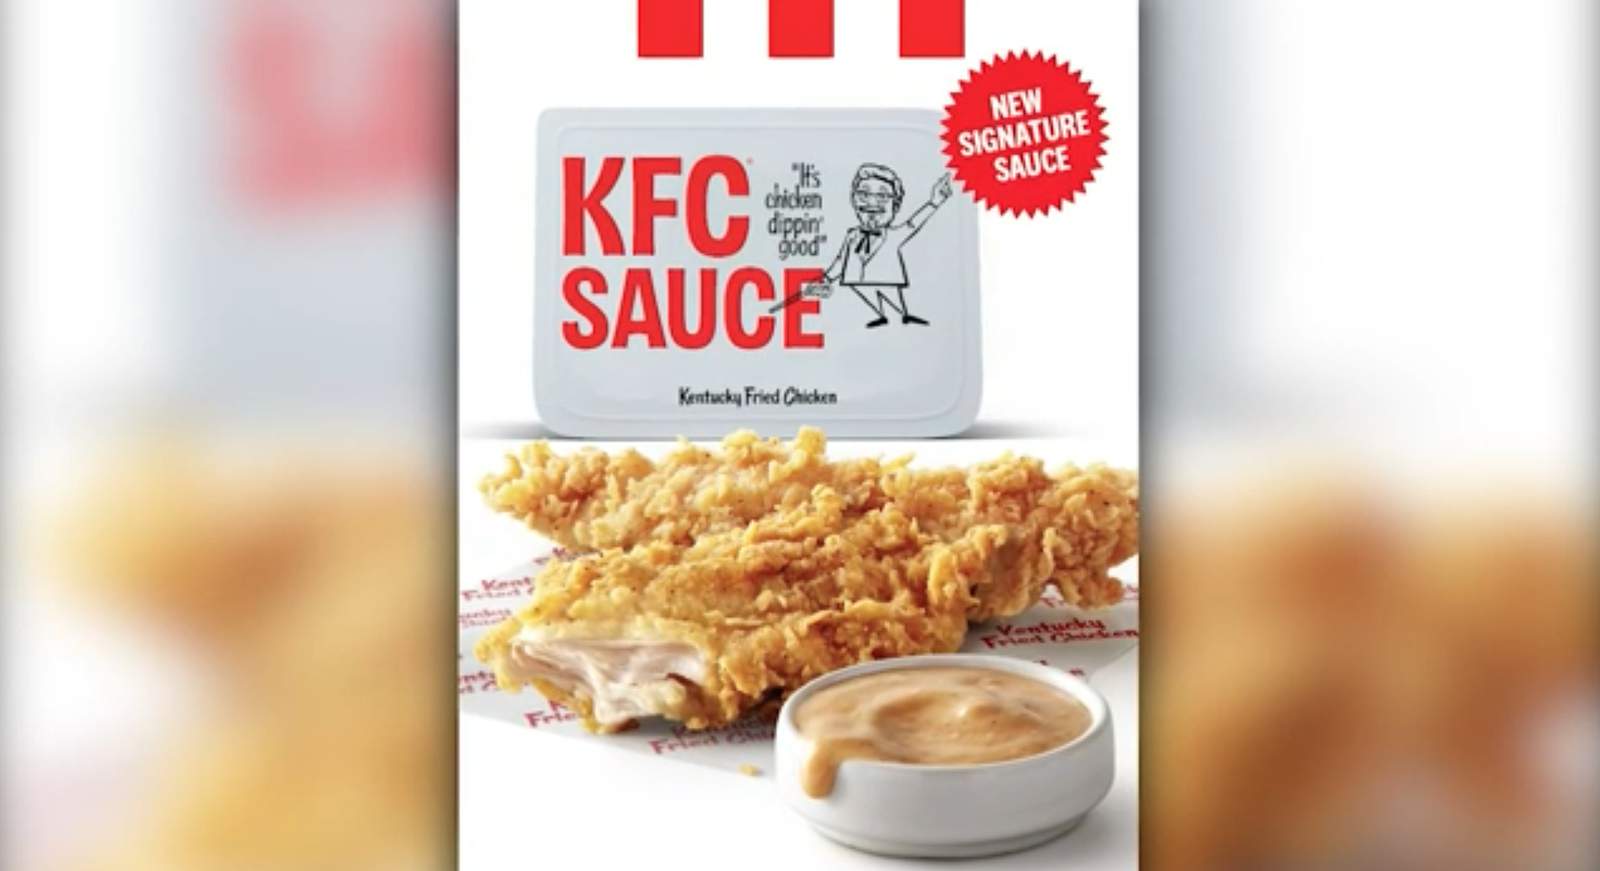 KFC launches new signature dipping sauce